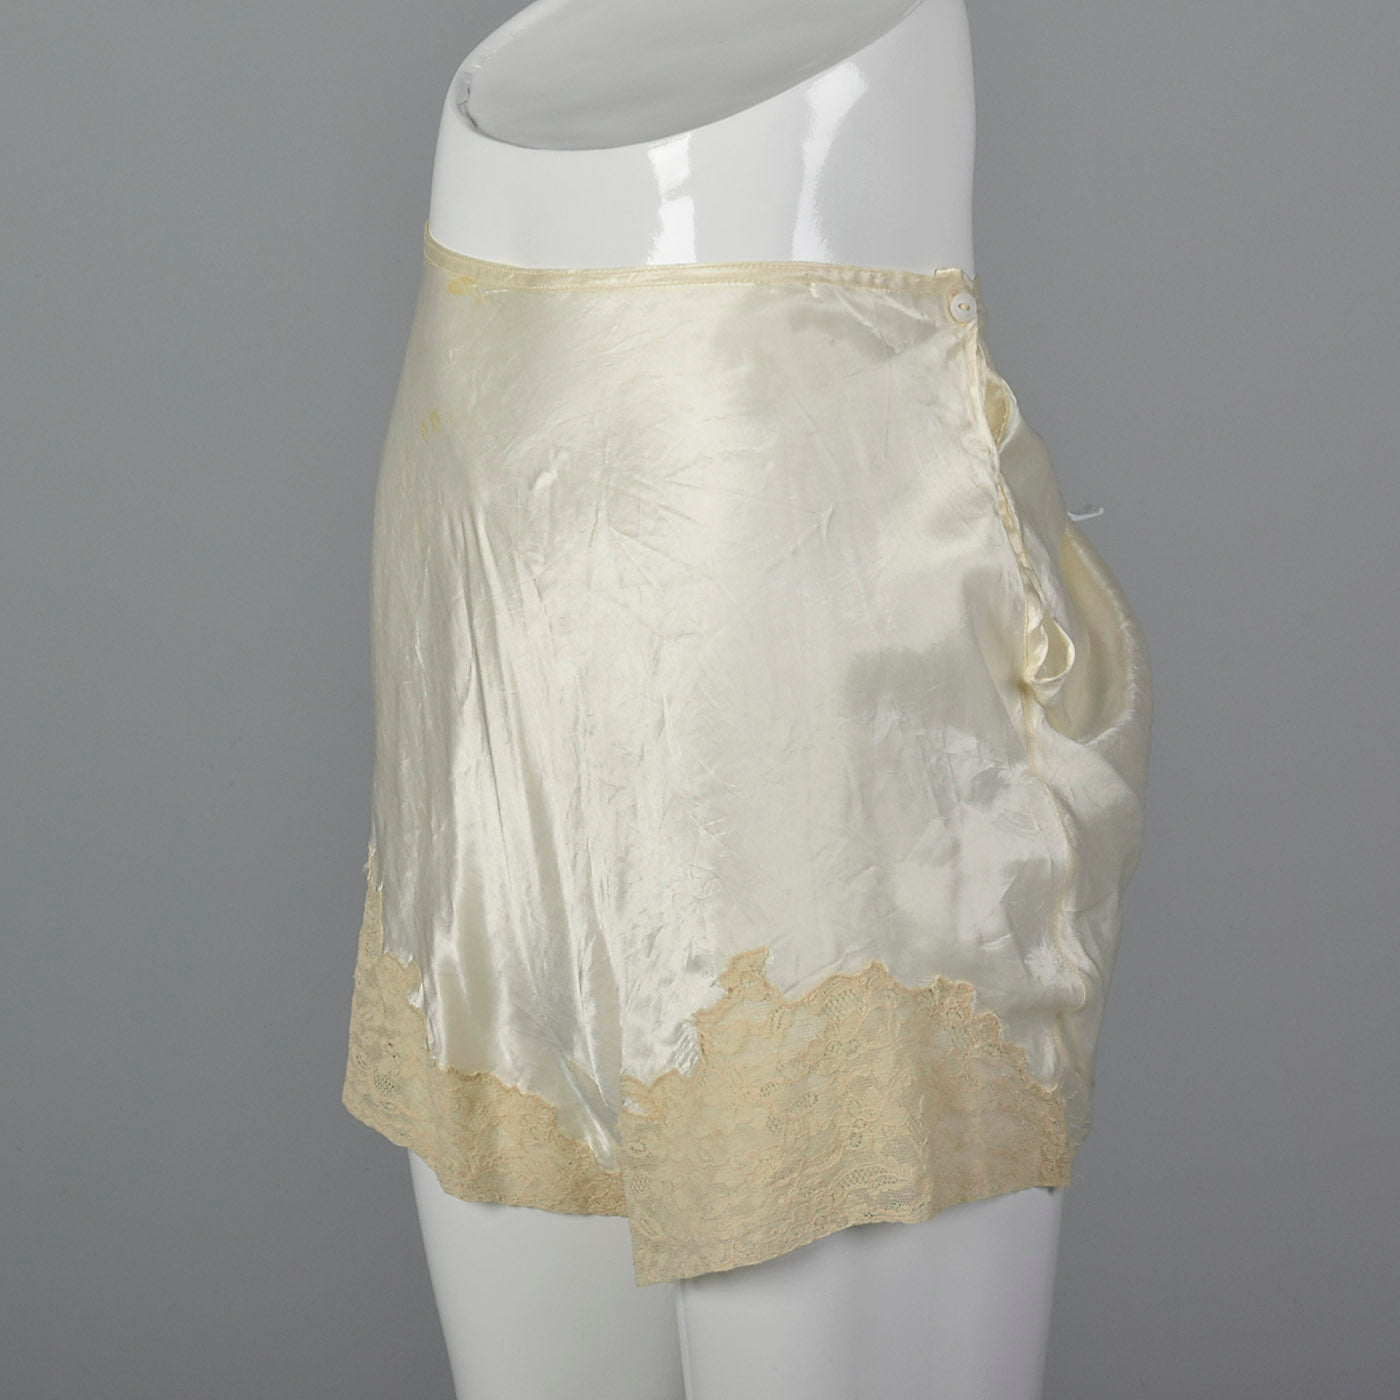 1930s White Slip Shorts with Lace Trim – Style & Salvage